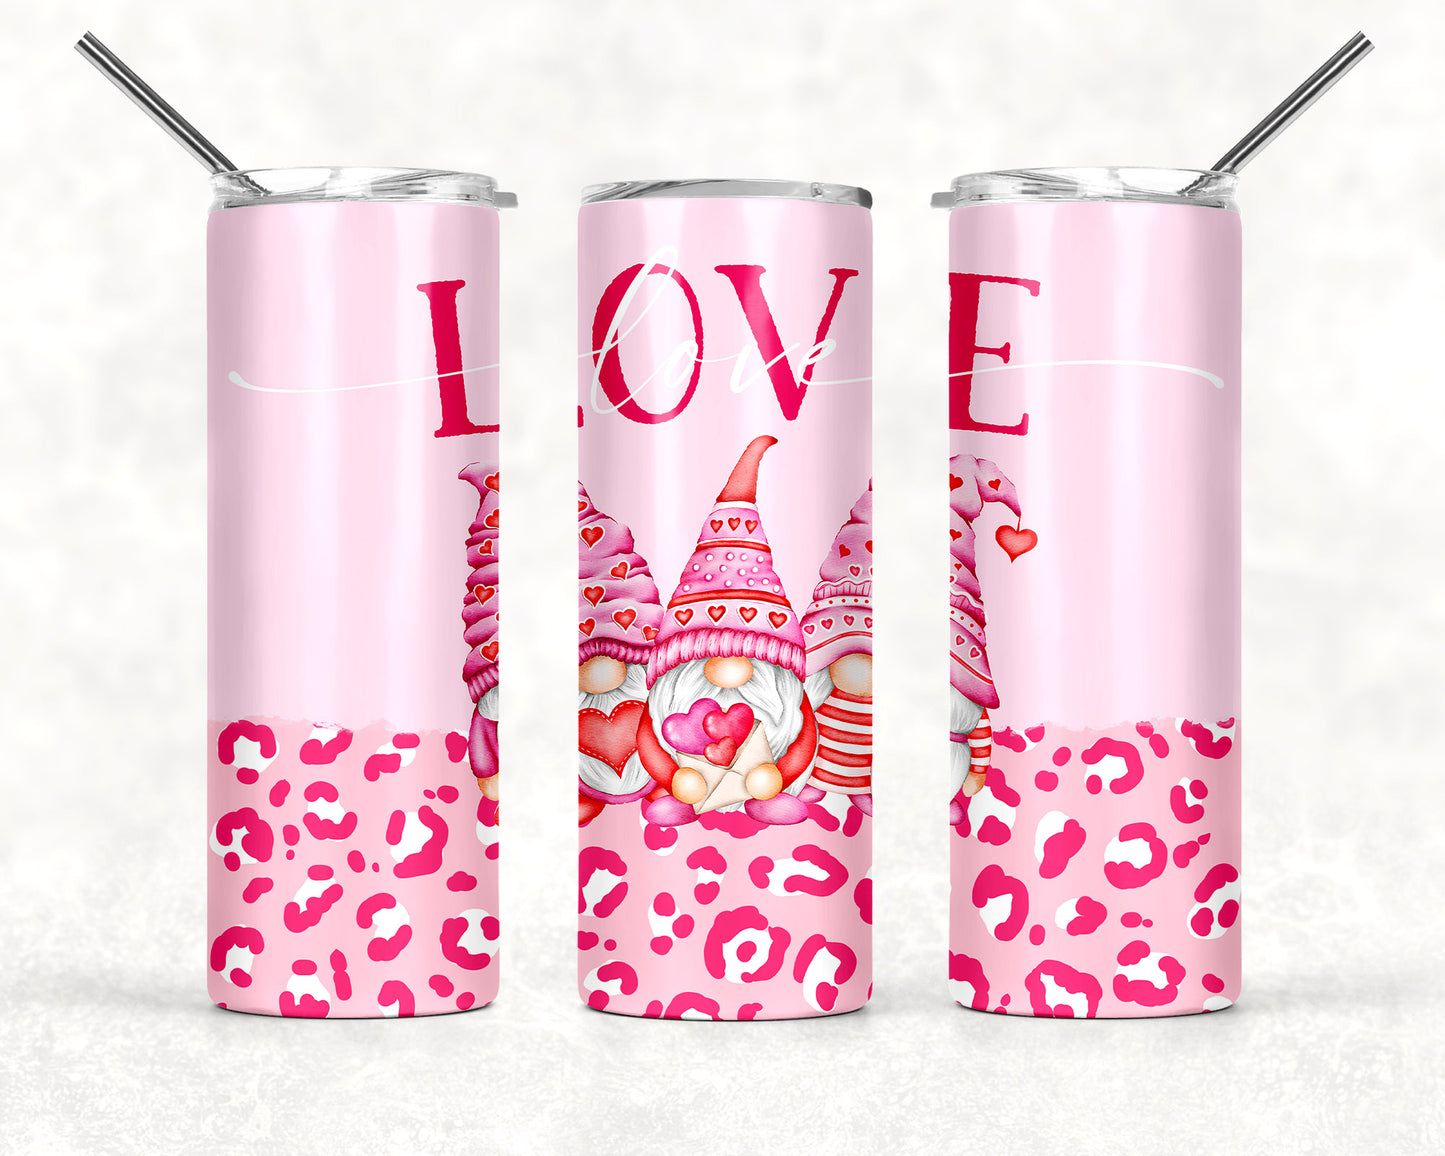 Eros Theme Tumbler - Great Gift For Friends - Buy 3 Get Extra 15% Off&Free Shipping Now